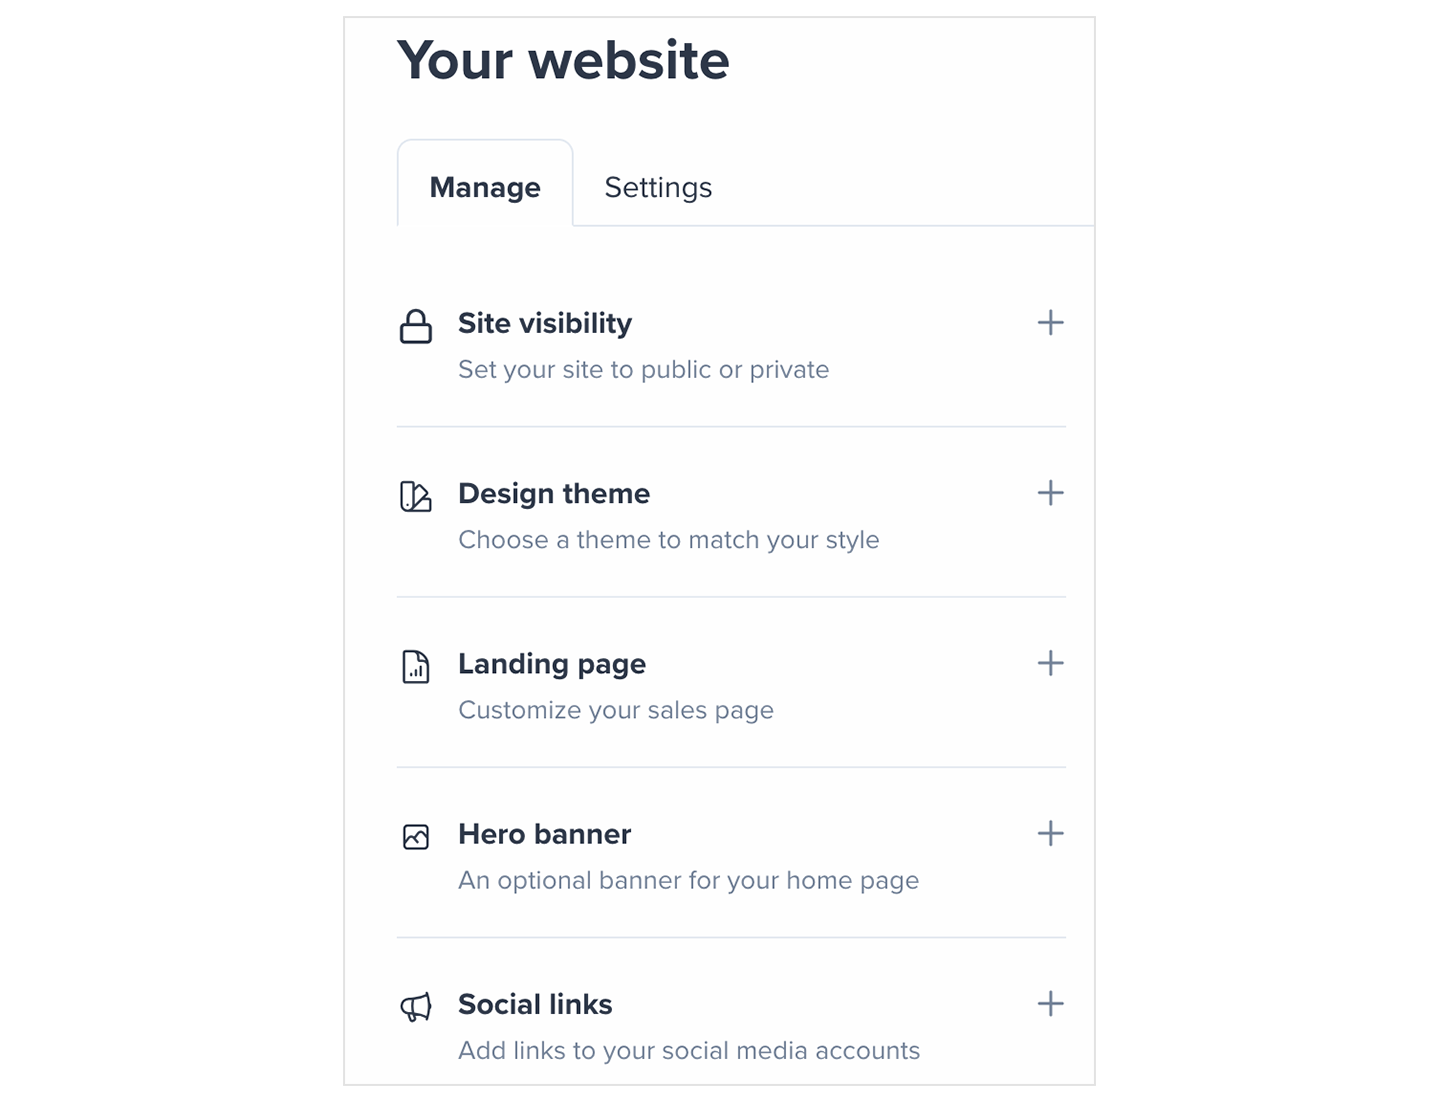 Customize your site settings